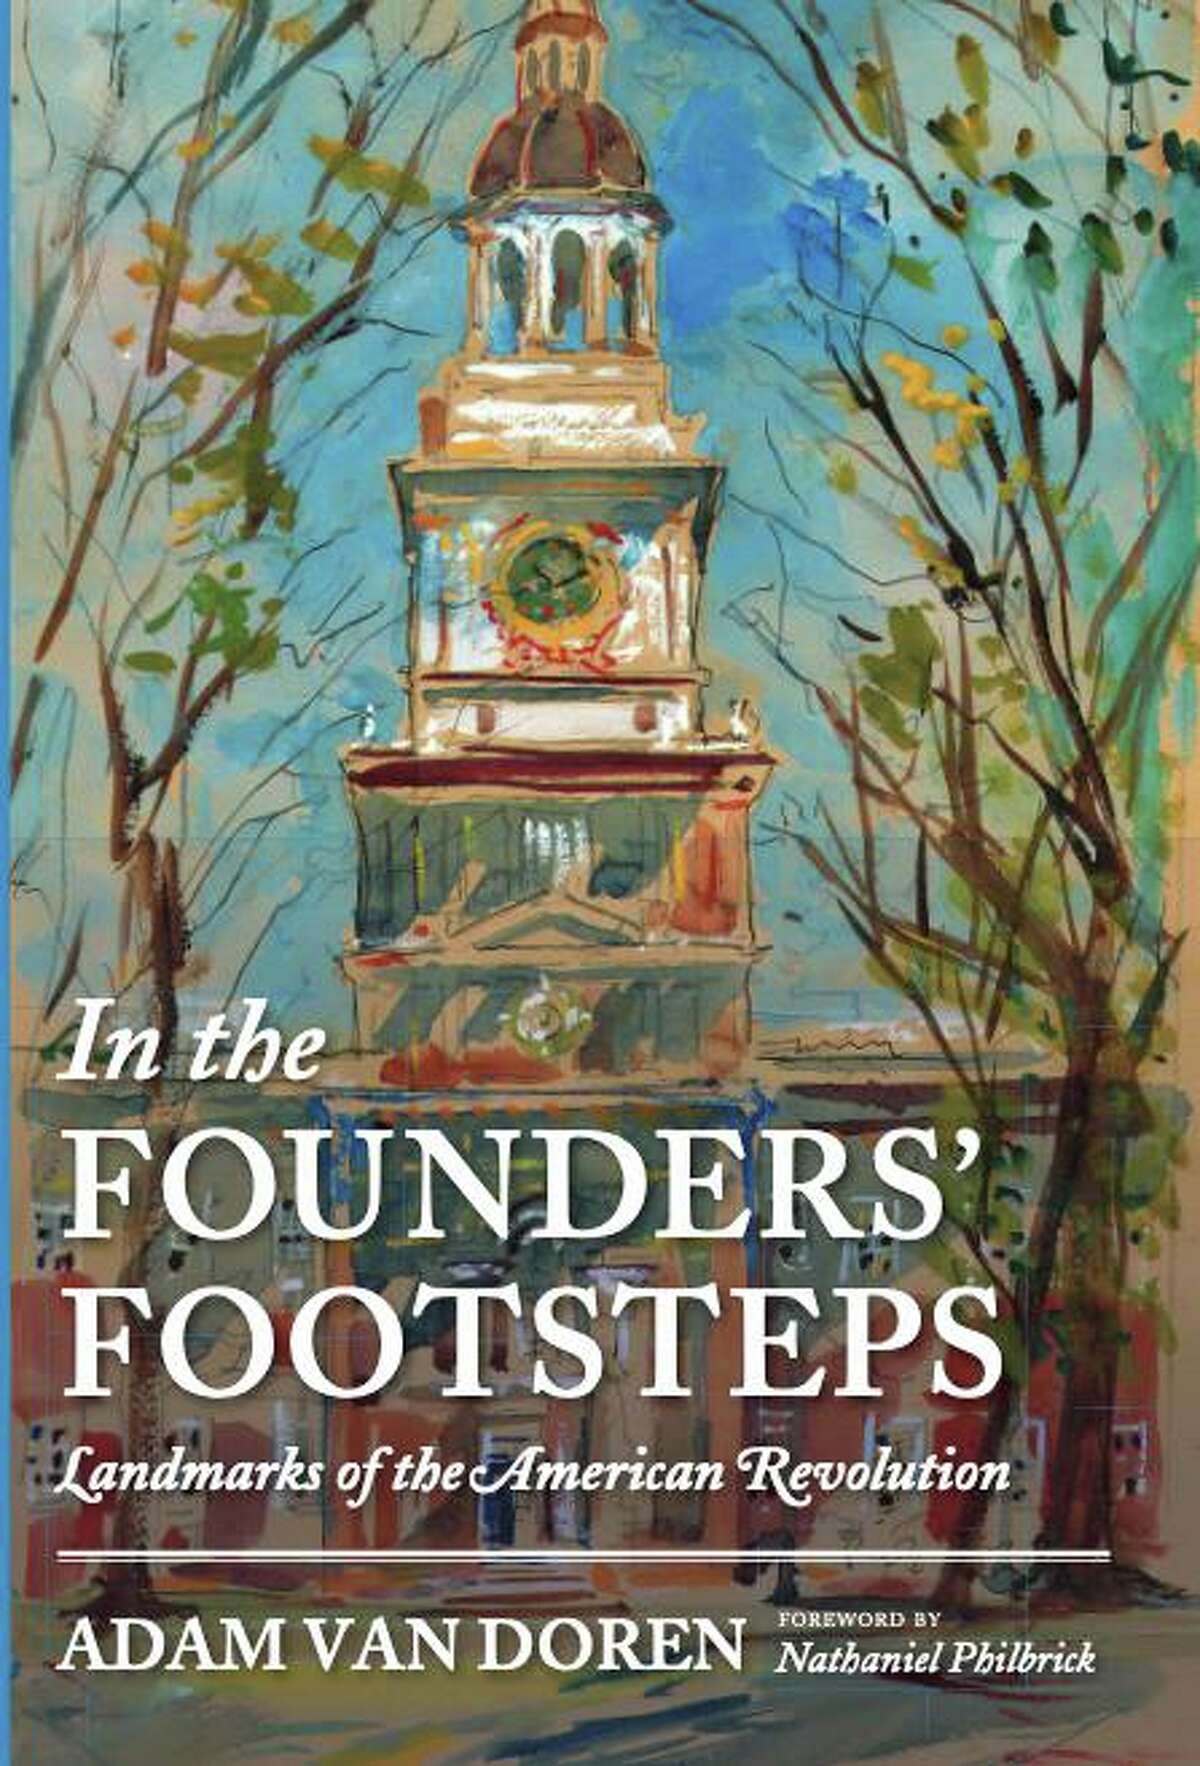 In The Founder’s Footsteps - A Walk Through History with Adam Van Doren, will be held June 22, with a talk and signing at 5 p.m. and a reception from 6-8 p.m.